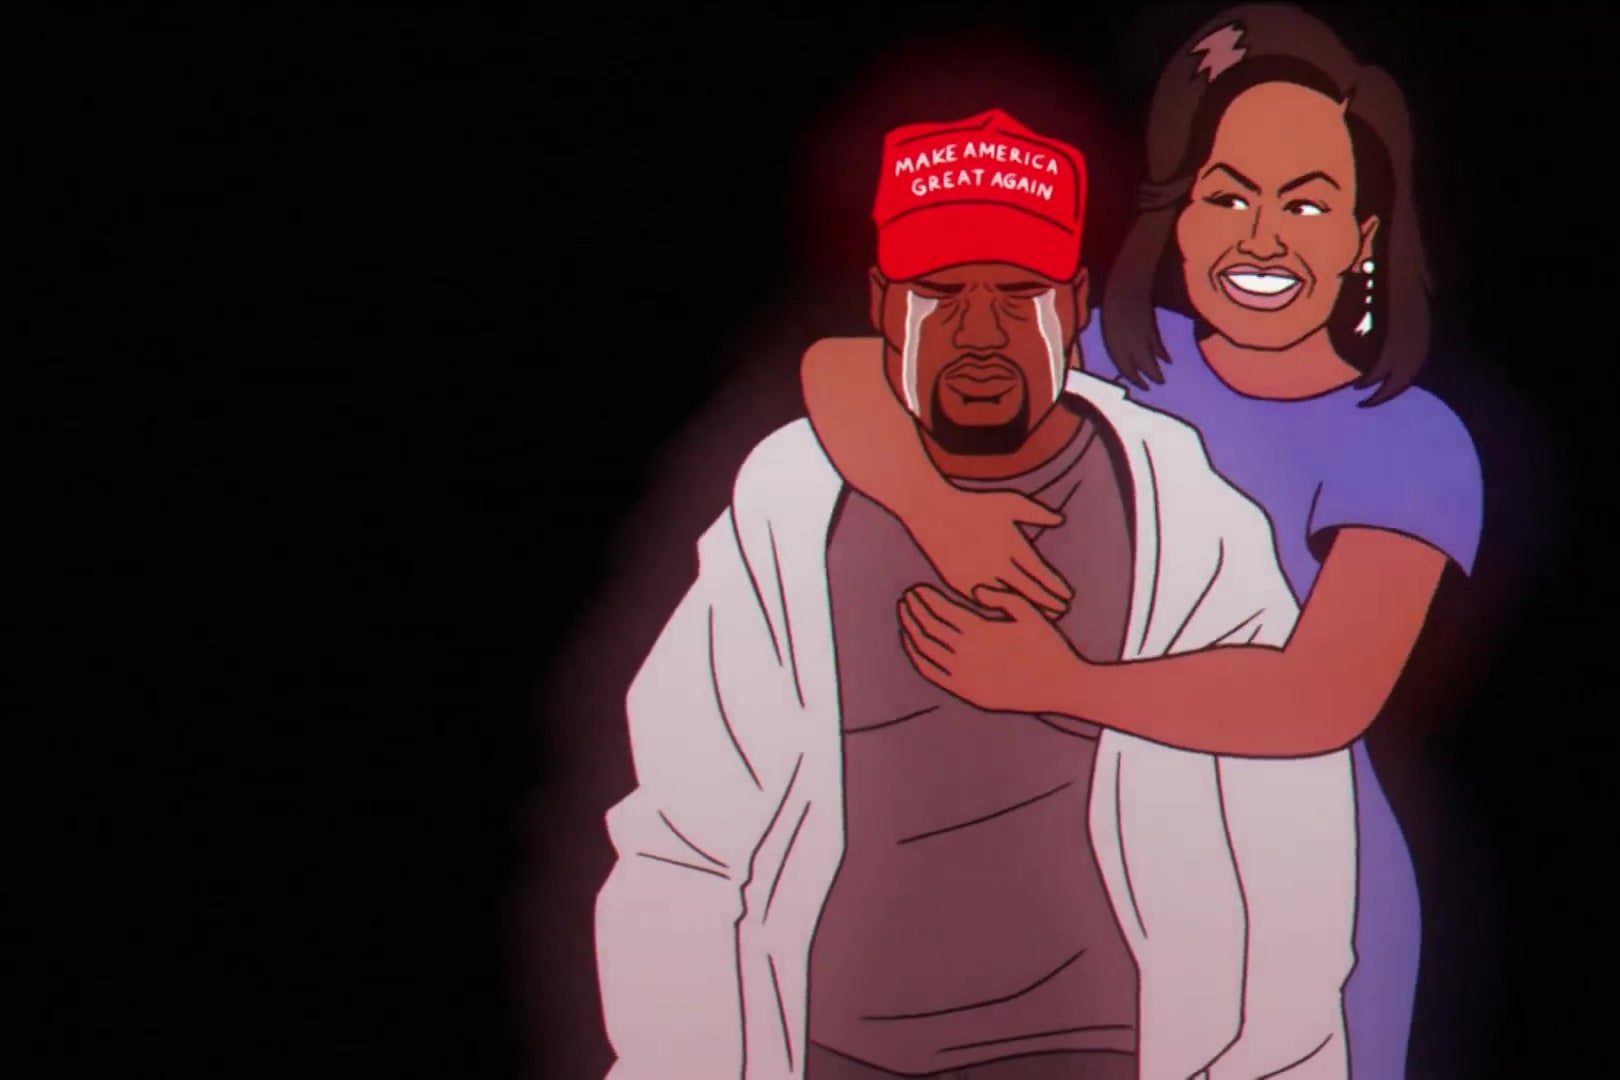 An animated version of Michelle Obama hugging an animated version of Kanye West, who is wearing a "Make America Great Again" hat.